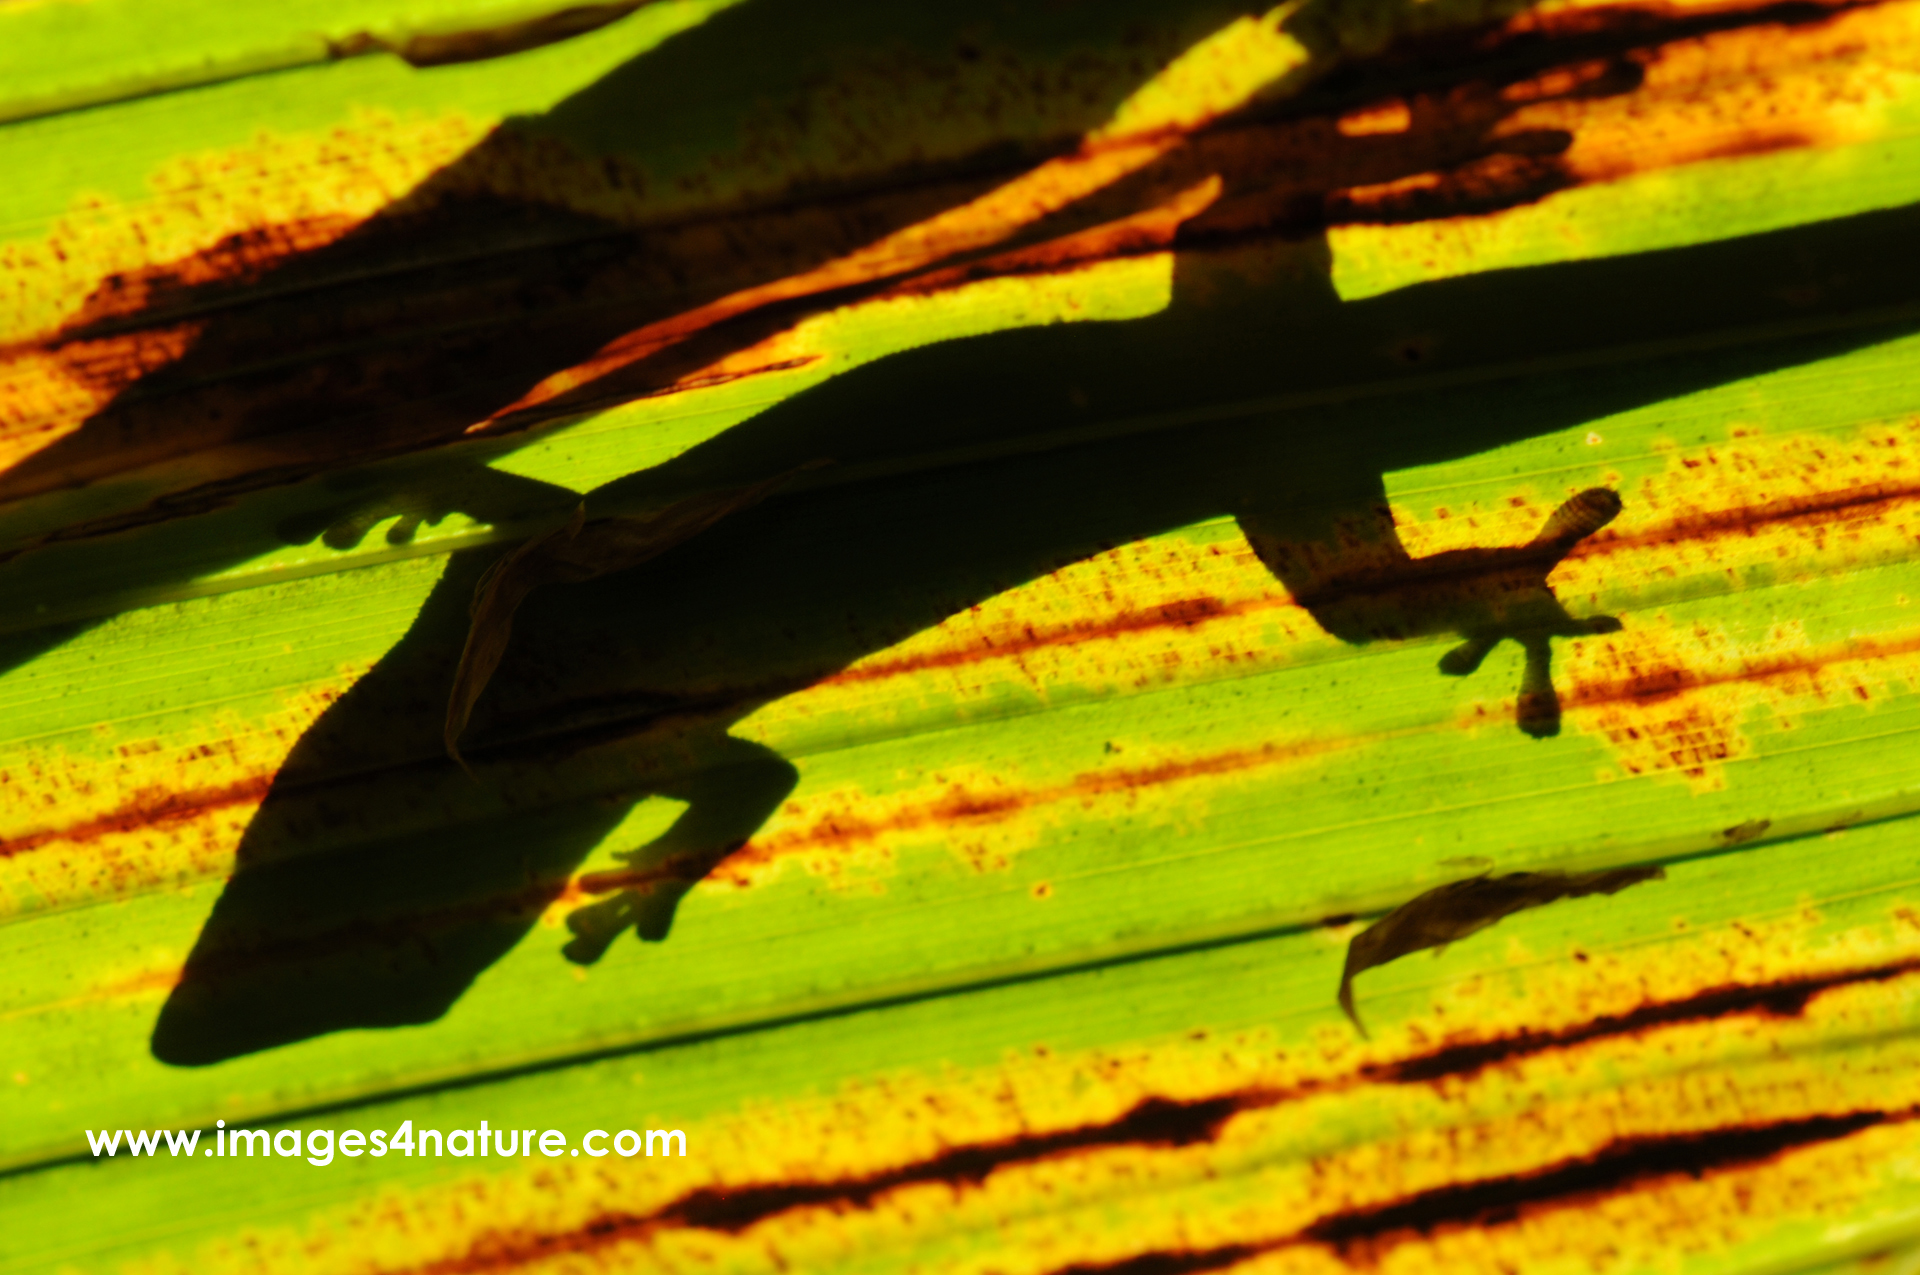 Shadow of lizzard seen from below through colorful leaf